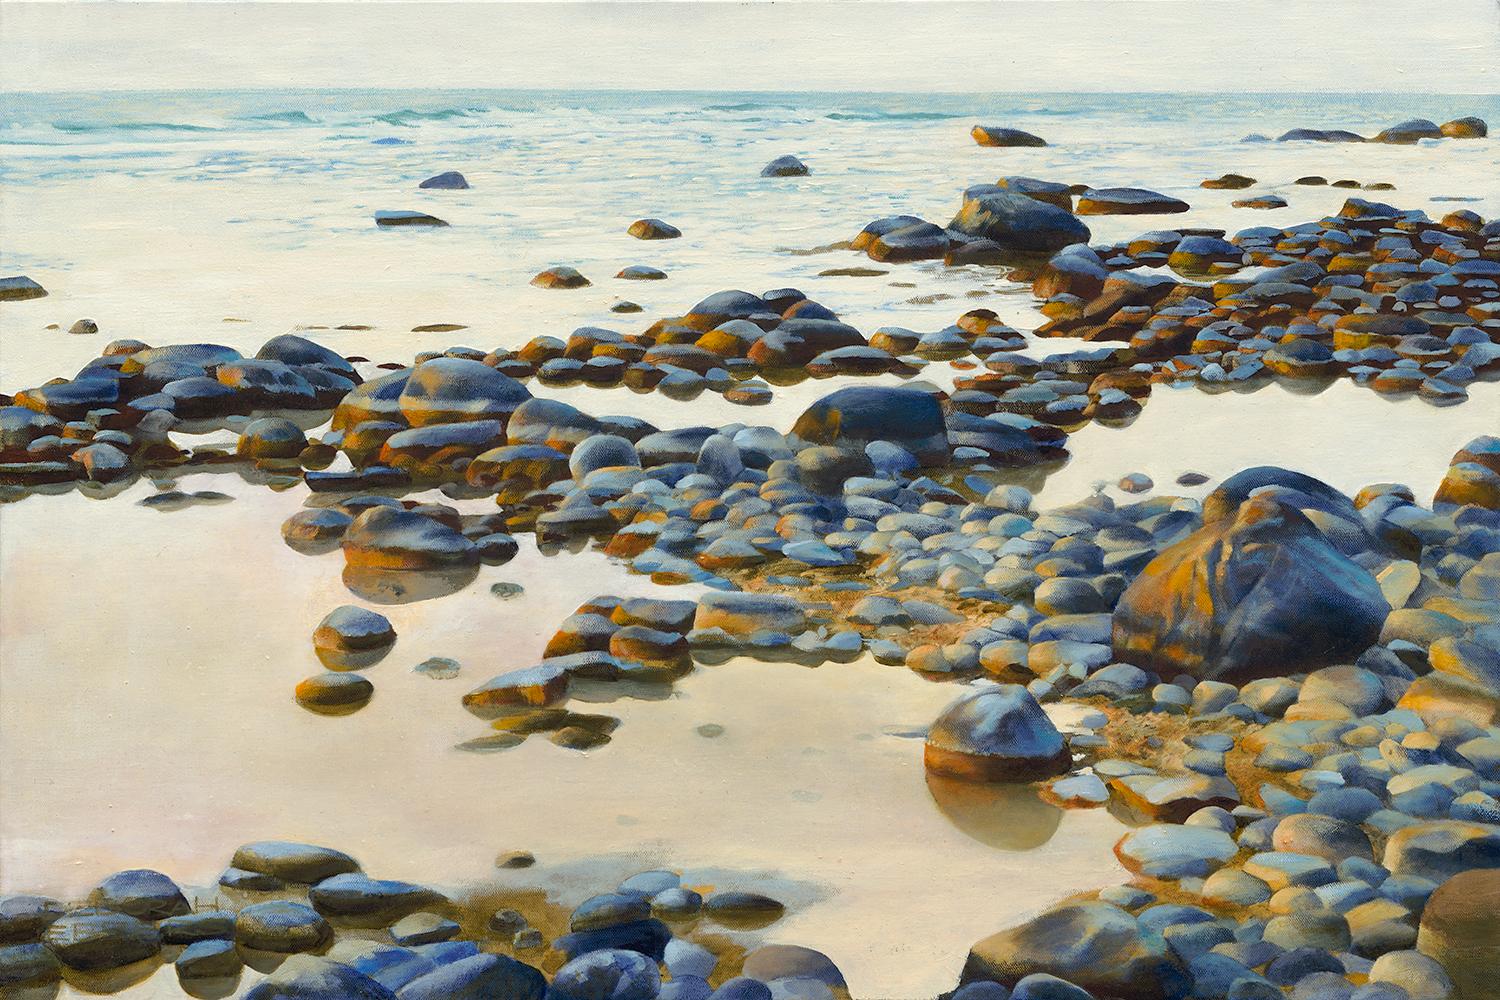 Deborah Ebbers Landscape Painting - Song of Stones, Rocky Beach of Northern Michigan, Original Oil on Canvas